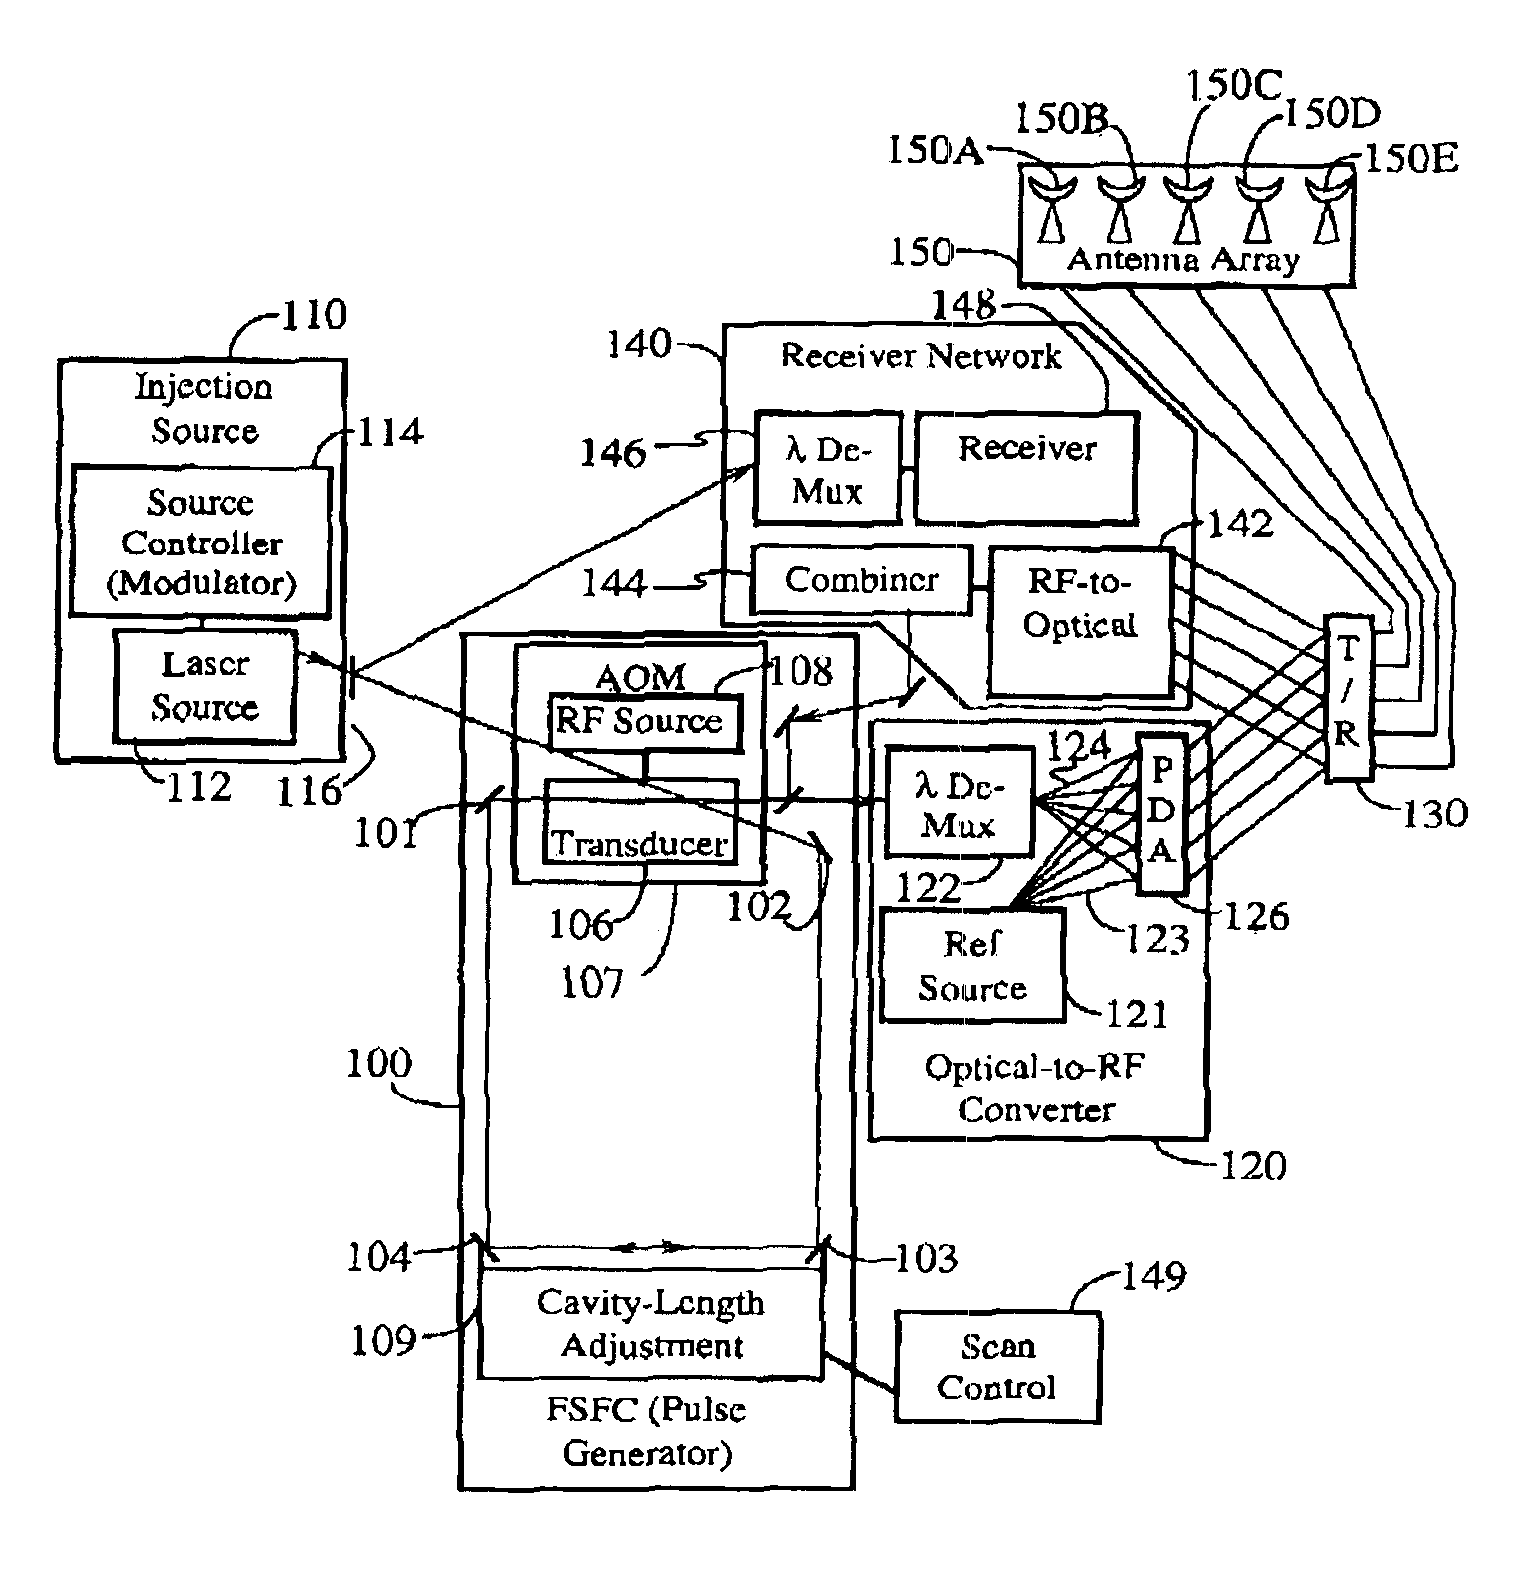 Frequency-shifted feedback cavity used as a phased array antenna controller and carrier interference multiple access spread-spectrum transmitter